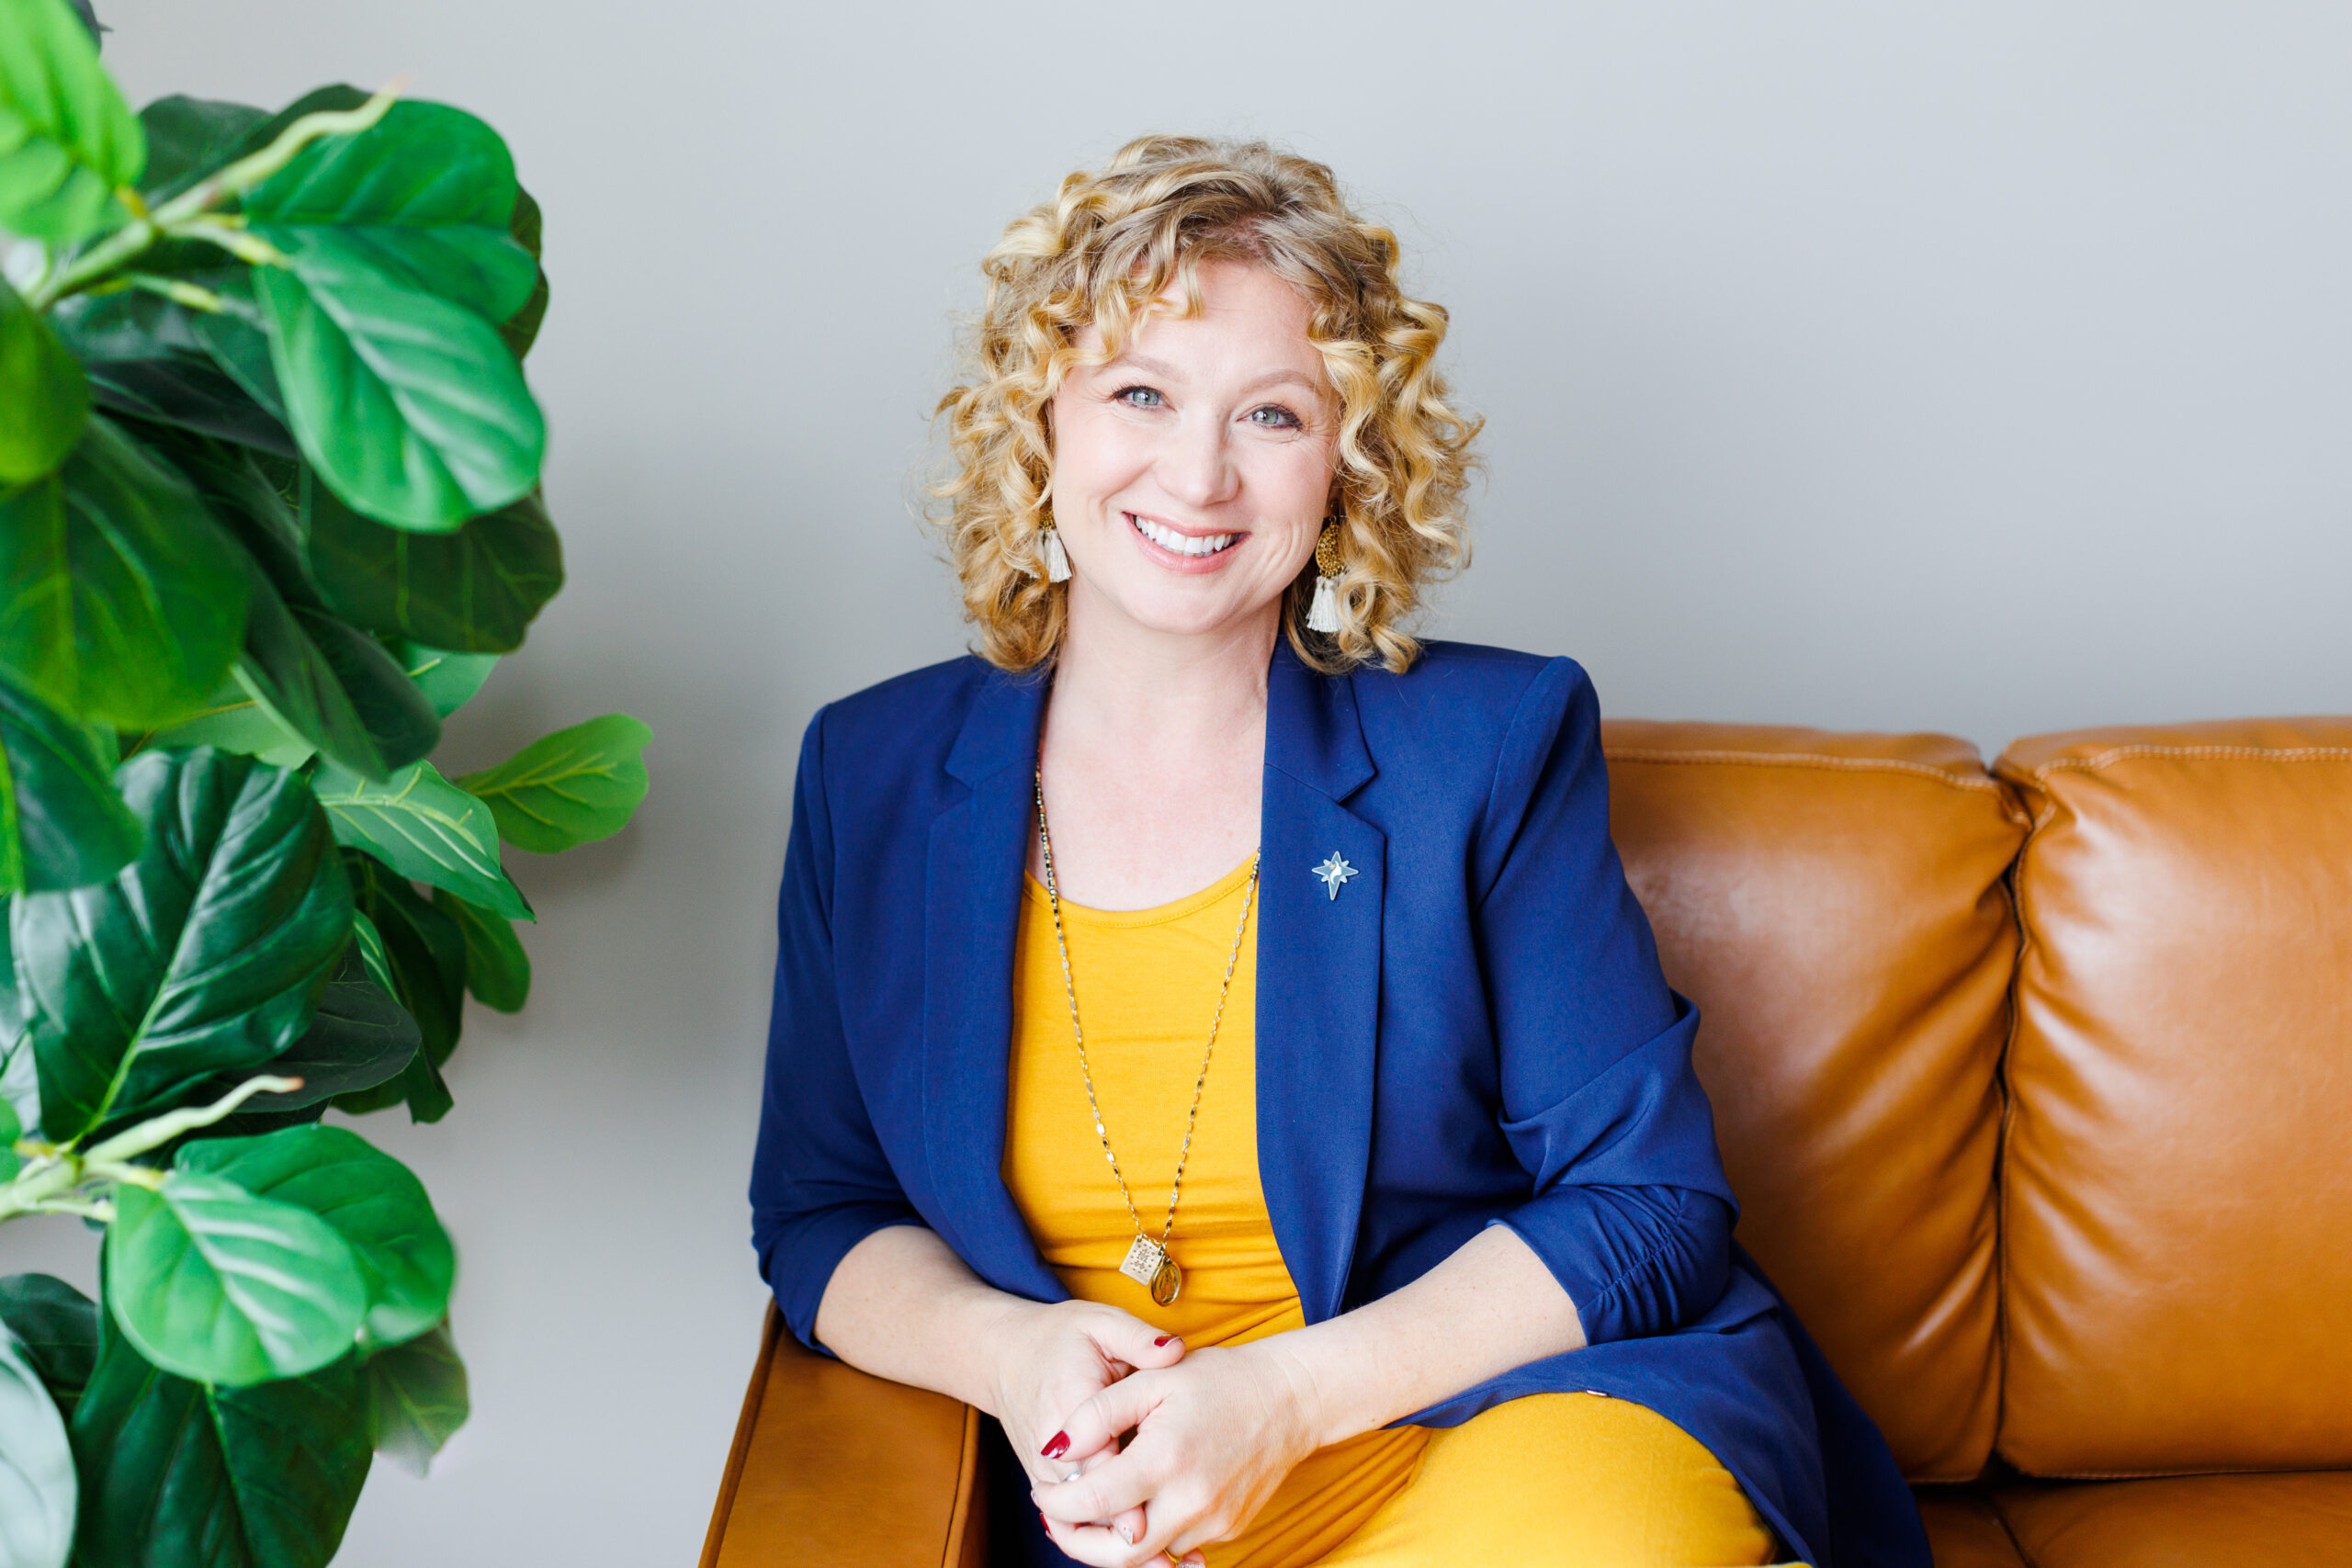 A blonde female in a yellow dress and bright blue blazer sits in a brown leather chair posing for a headshot. She is the founder of Guiding Star Project, a nationwide pregnancy resource center